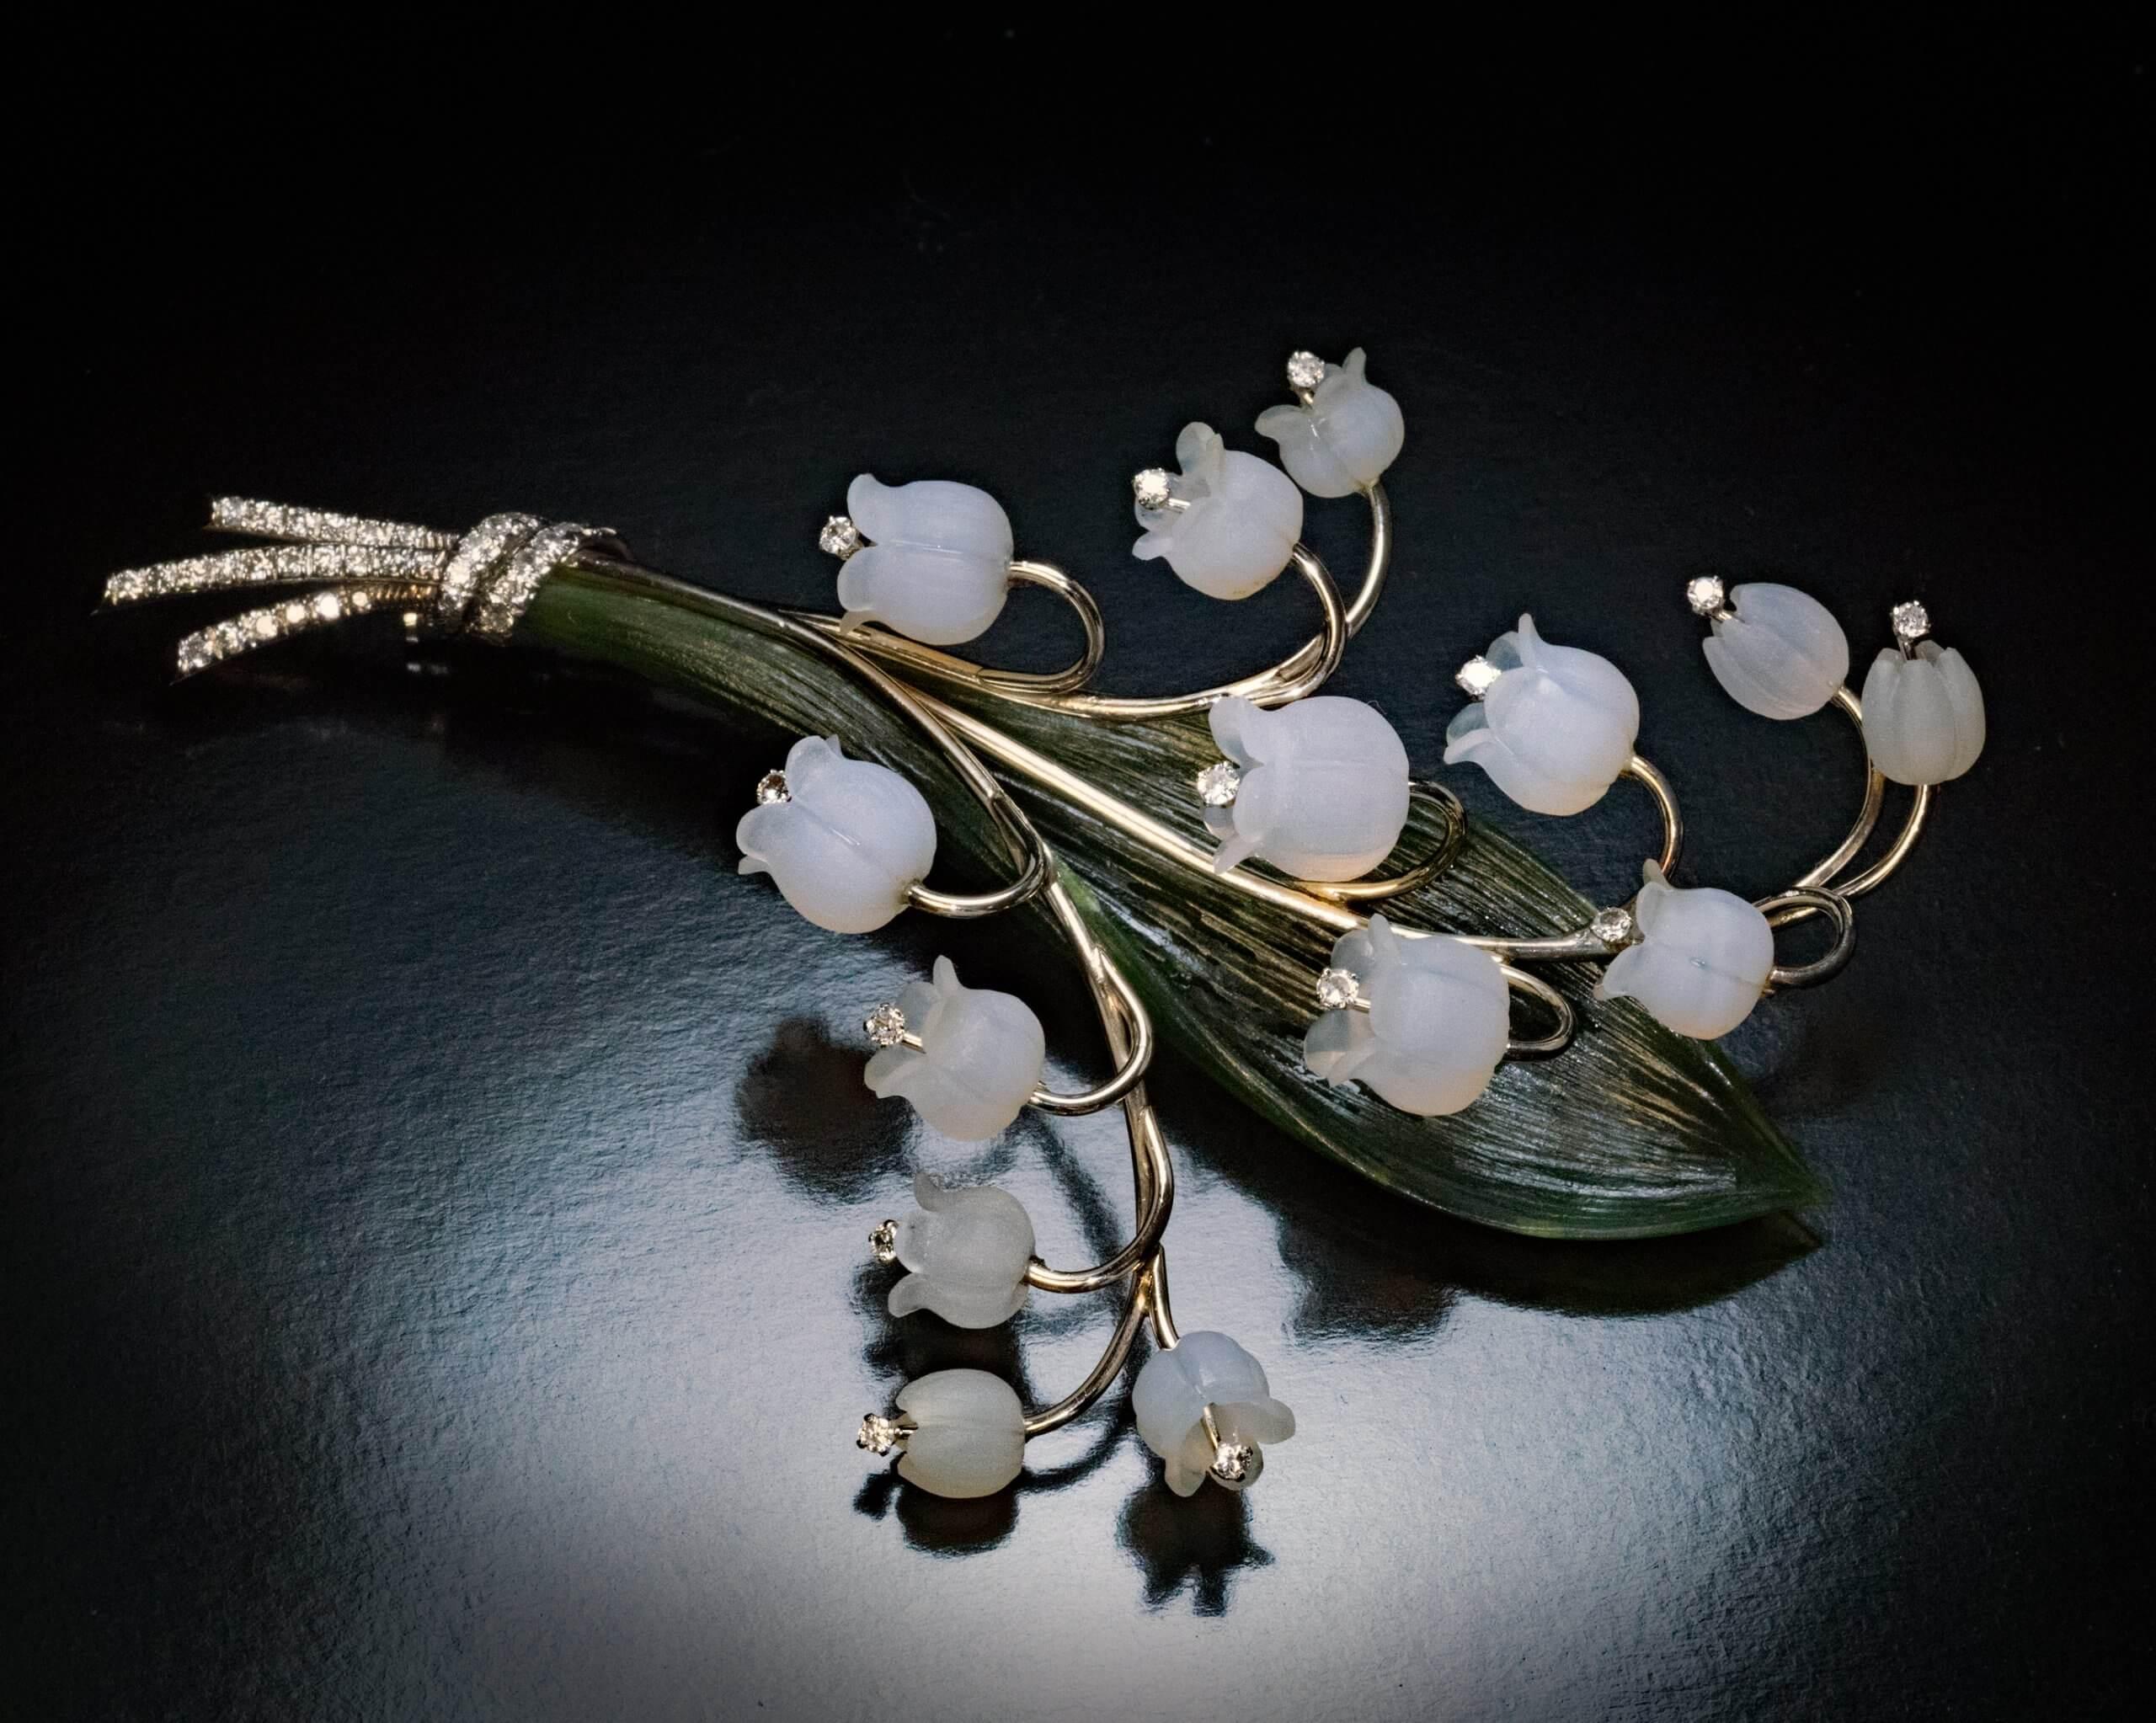 Made by Paltscho in Vienna, Austria in the 1950s.  The brooch is finely modeled as a lily of the valley. The flower heads are superbly carved from frosted rock crystal and embellished with diamonds. The green leaf is naturalistically carved from a